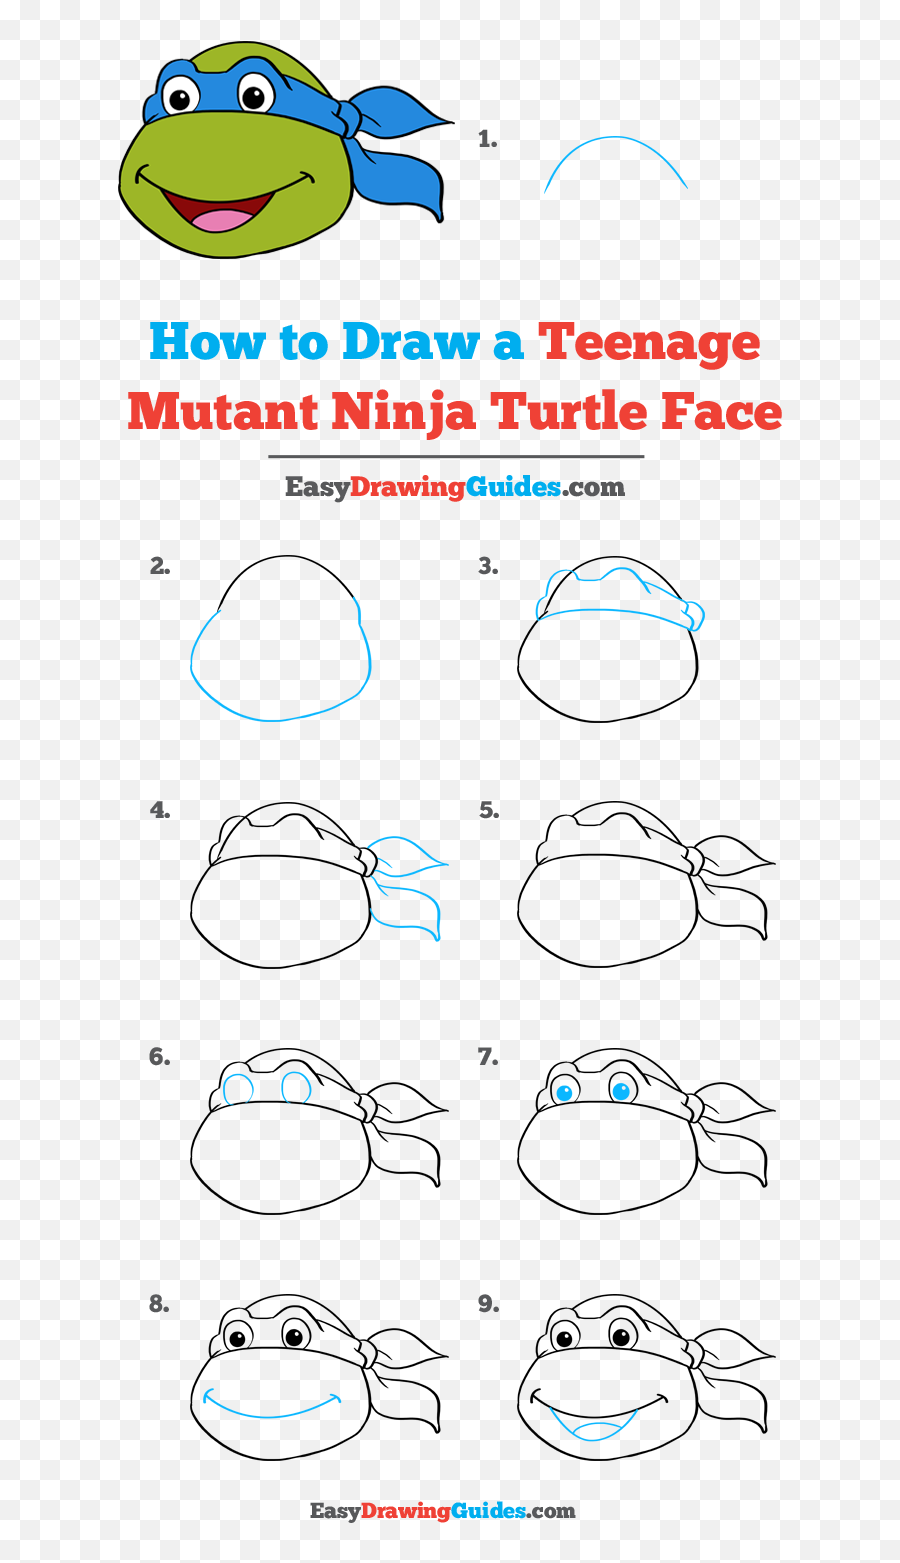 How To Draw A Teenage Mutant Ninja Turtle Face - Step By Step How To Draw A Ninja Turtle Png,Ninja Face Png